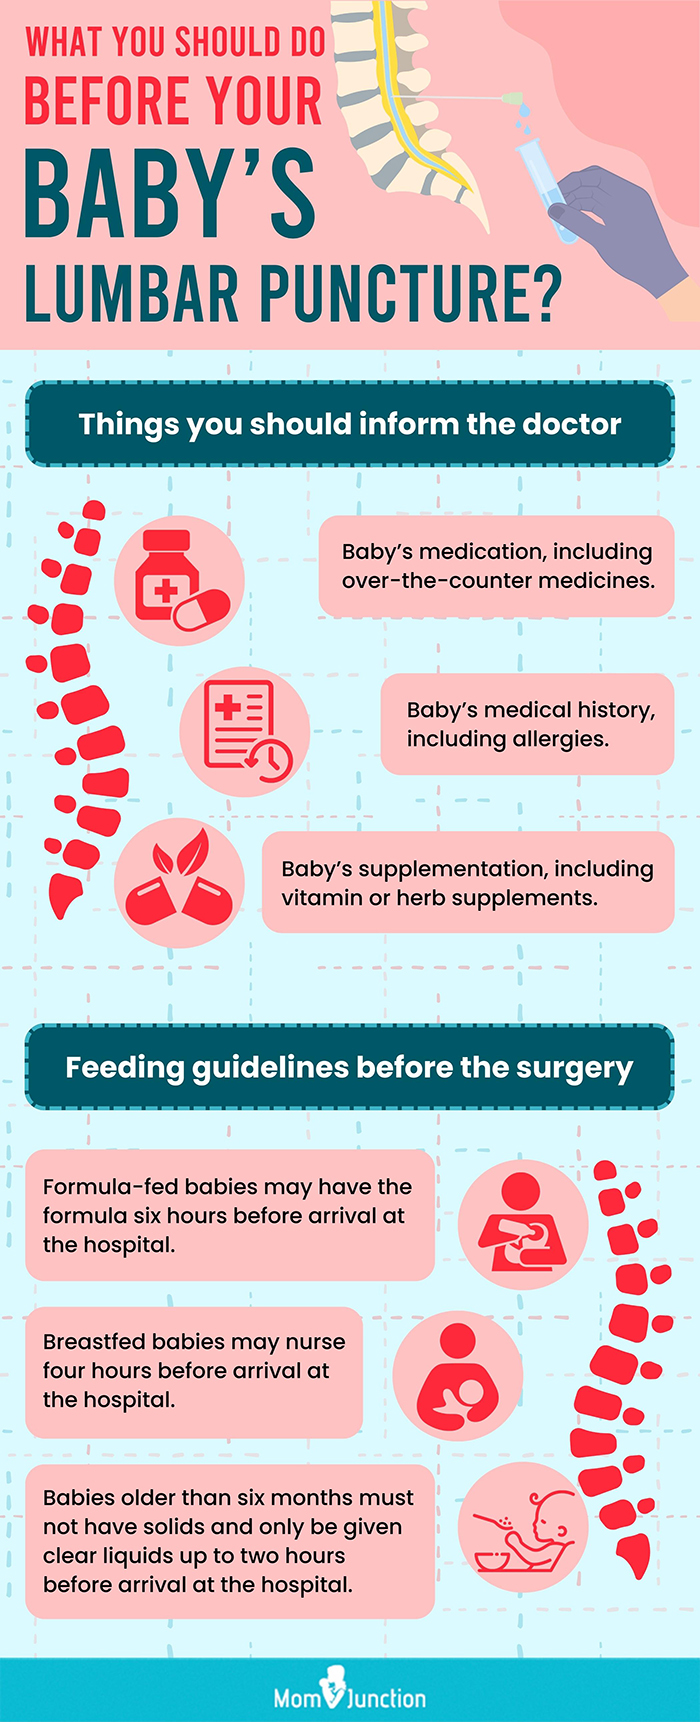 what you should do before your babys lumbar puncture (infographic)